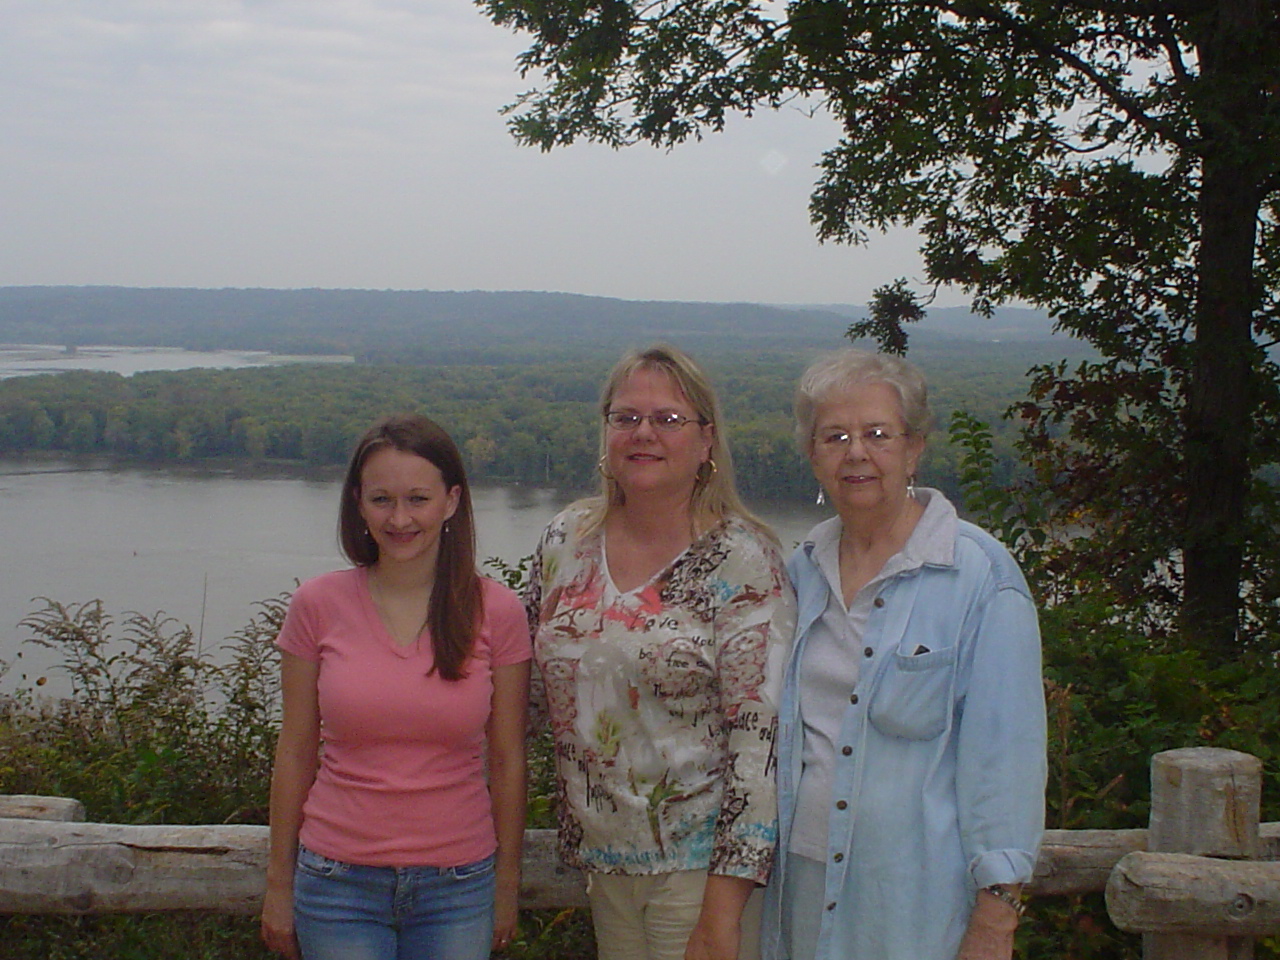 Grandma, Mom and Sarah in Bellevue IA. We had so much fun that day.